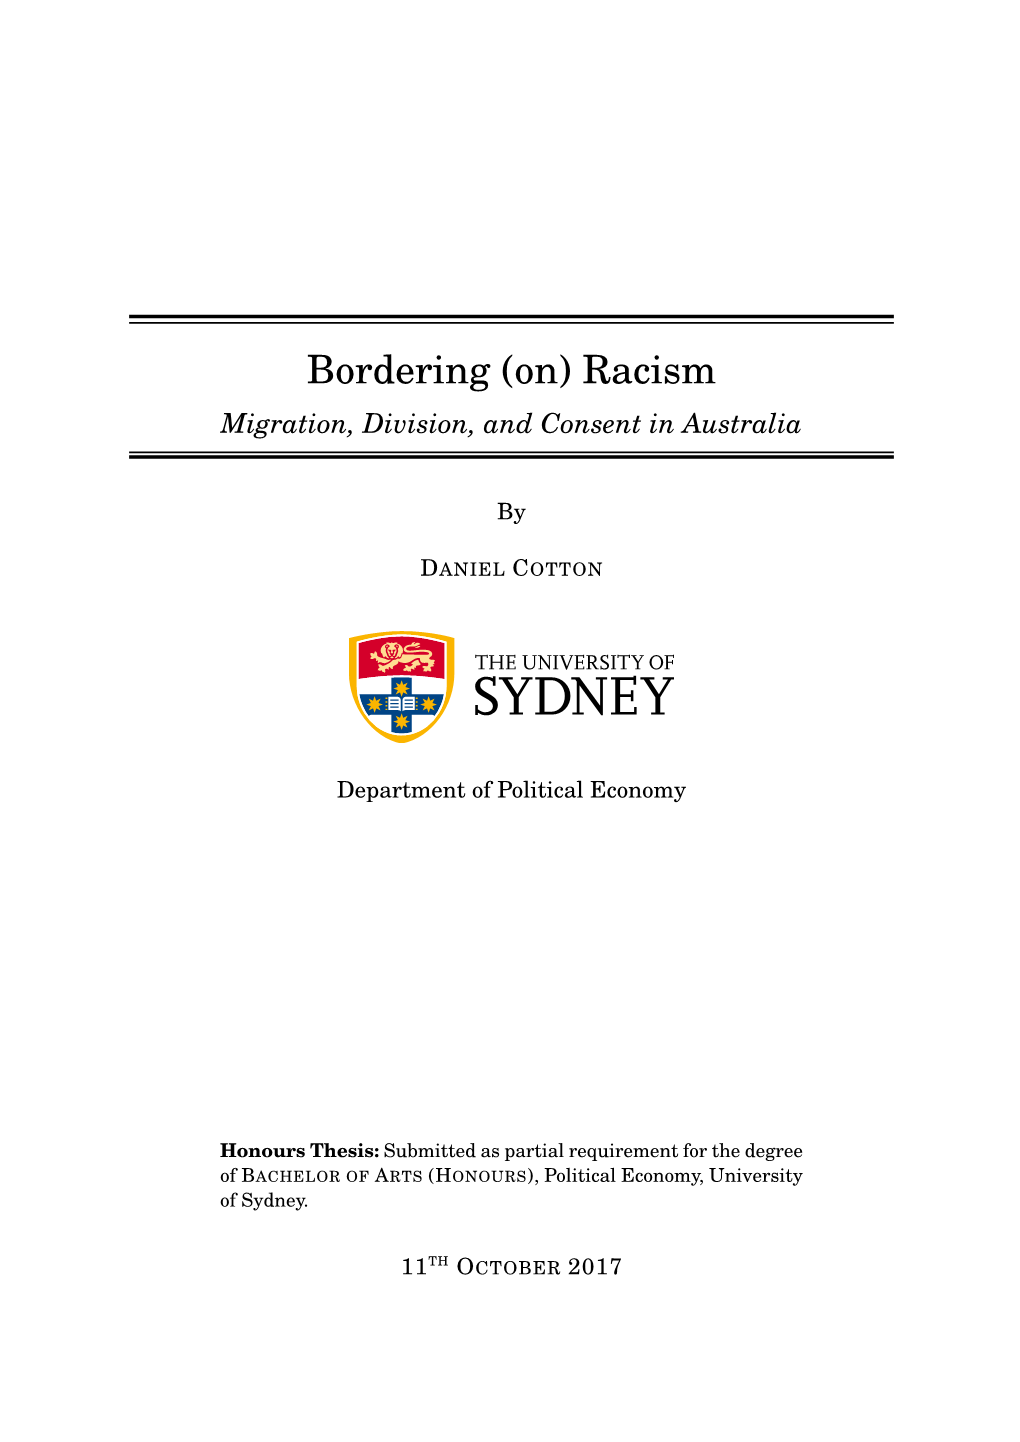 (On) Racism Migration, Division, and Consent in Australia